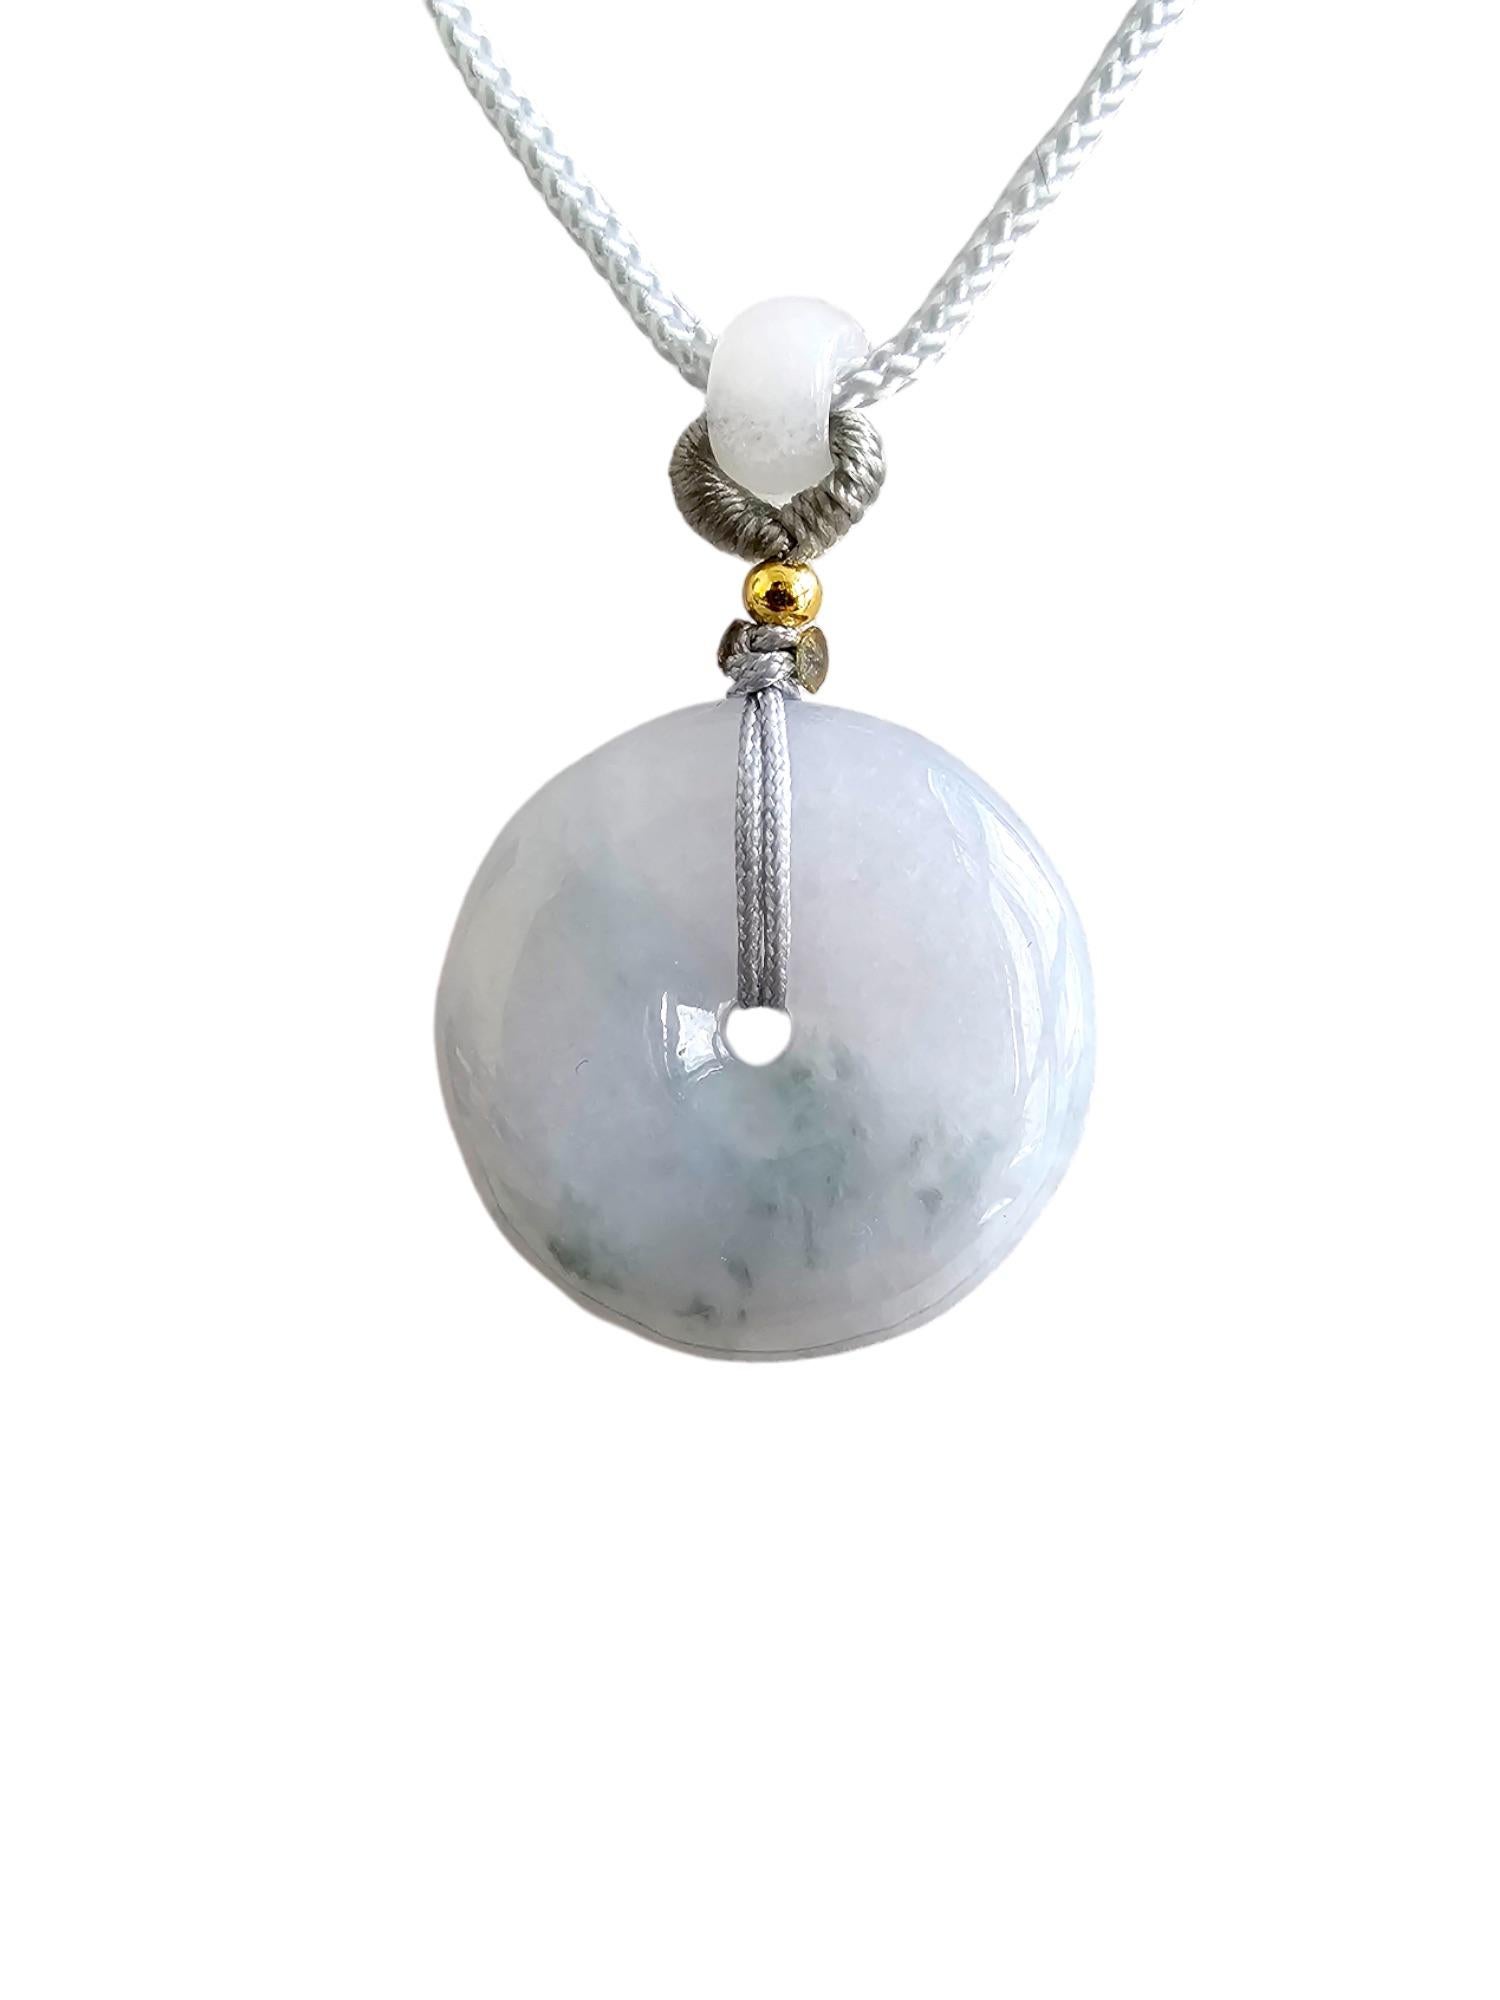 Sapporo Burmese A-Jadeite Icy 25mm Donut Pendant Necklace with FYORO String

Using Handpicked high translucency and carved natural Burmese A-Jadeite. We created a donut with inspiration notes from Sapporo, Japan. We allow the natural hues of